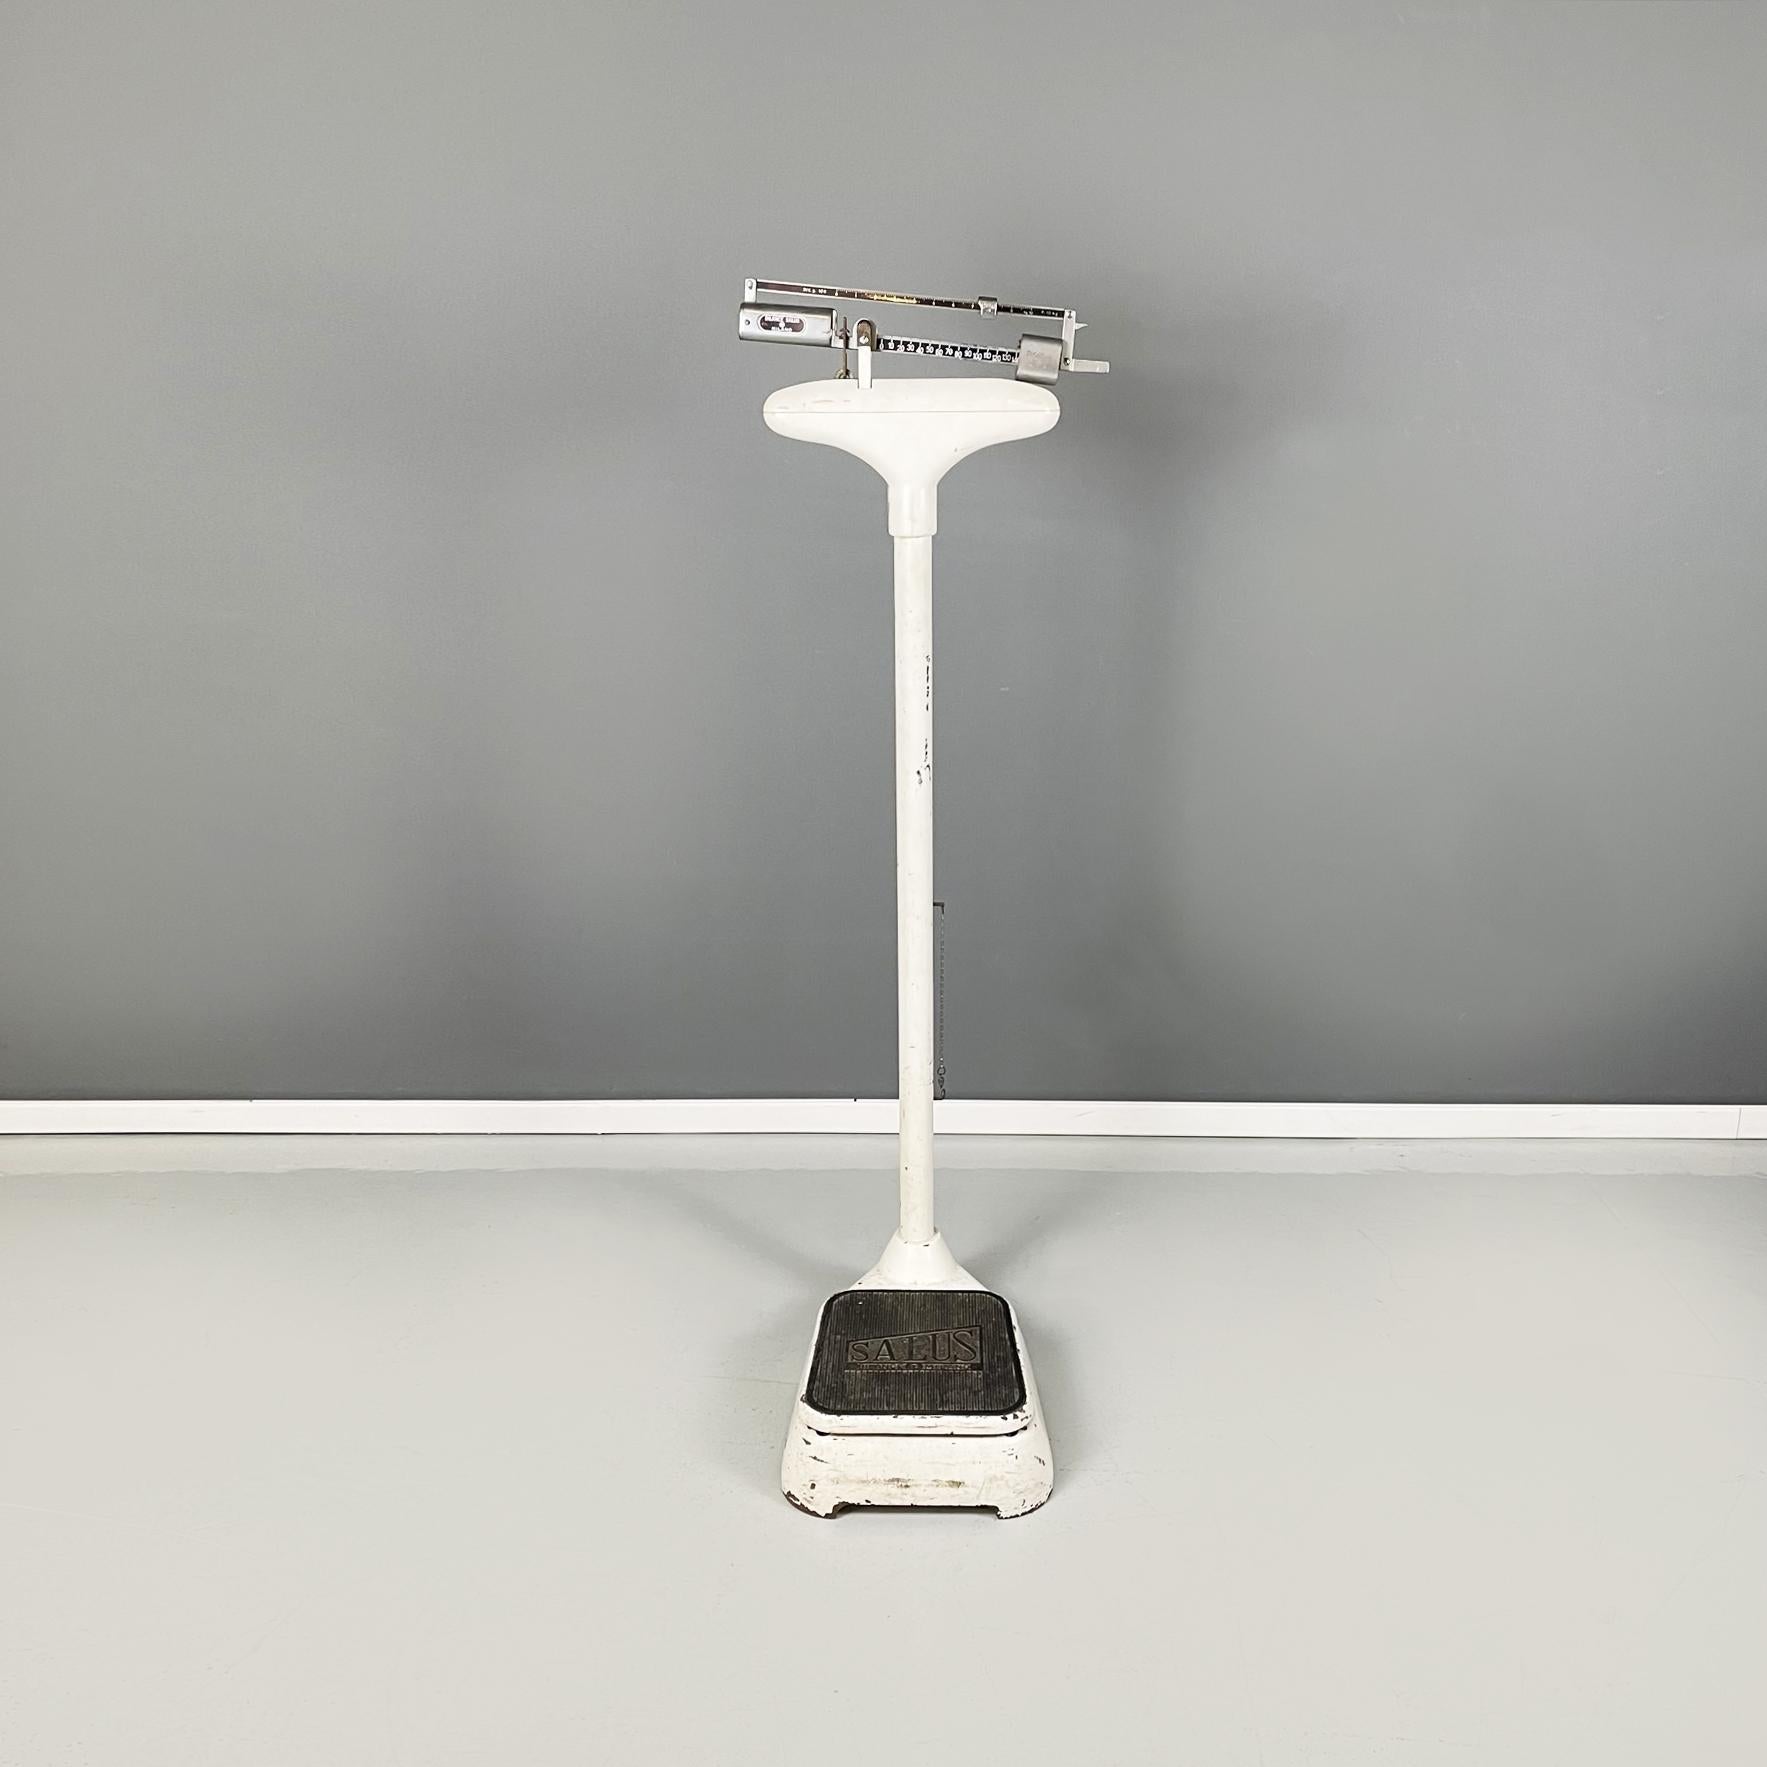 Italian mid-century White metal Vertical medical scale by Salus, 1960s
Vertical medical scale in white painted metal. In the upper part it has a metal balance wheel. In the lower part it has the black squared platform where to place the